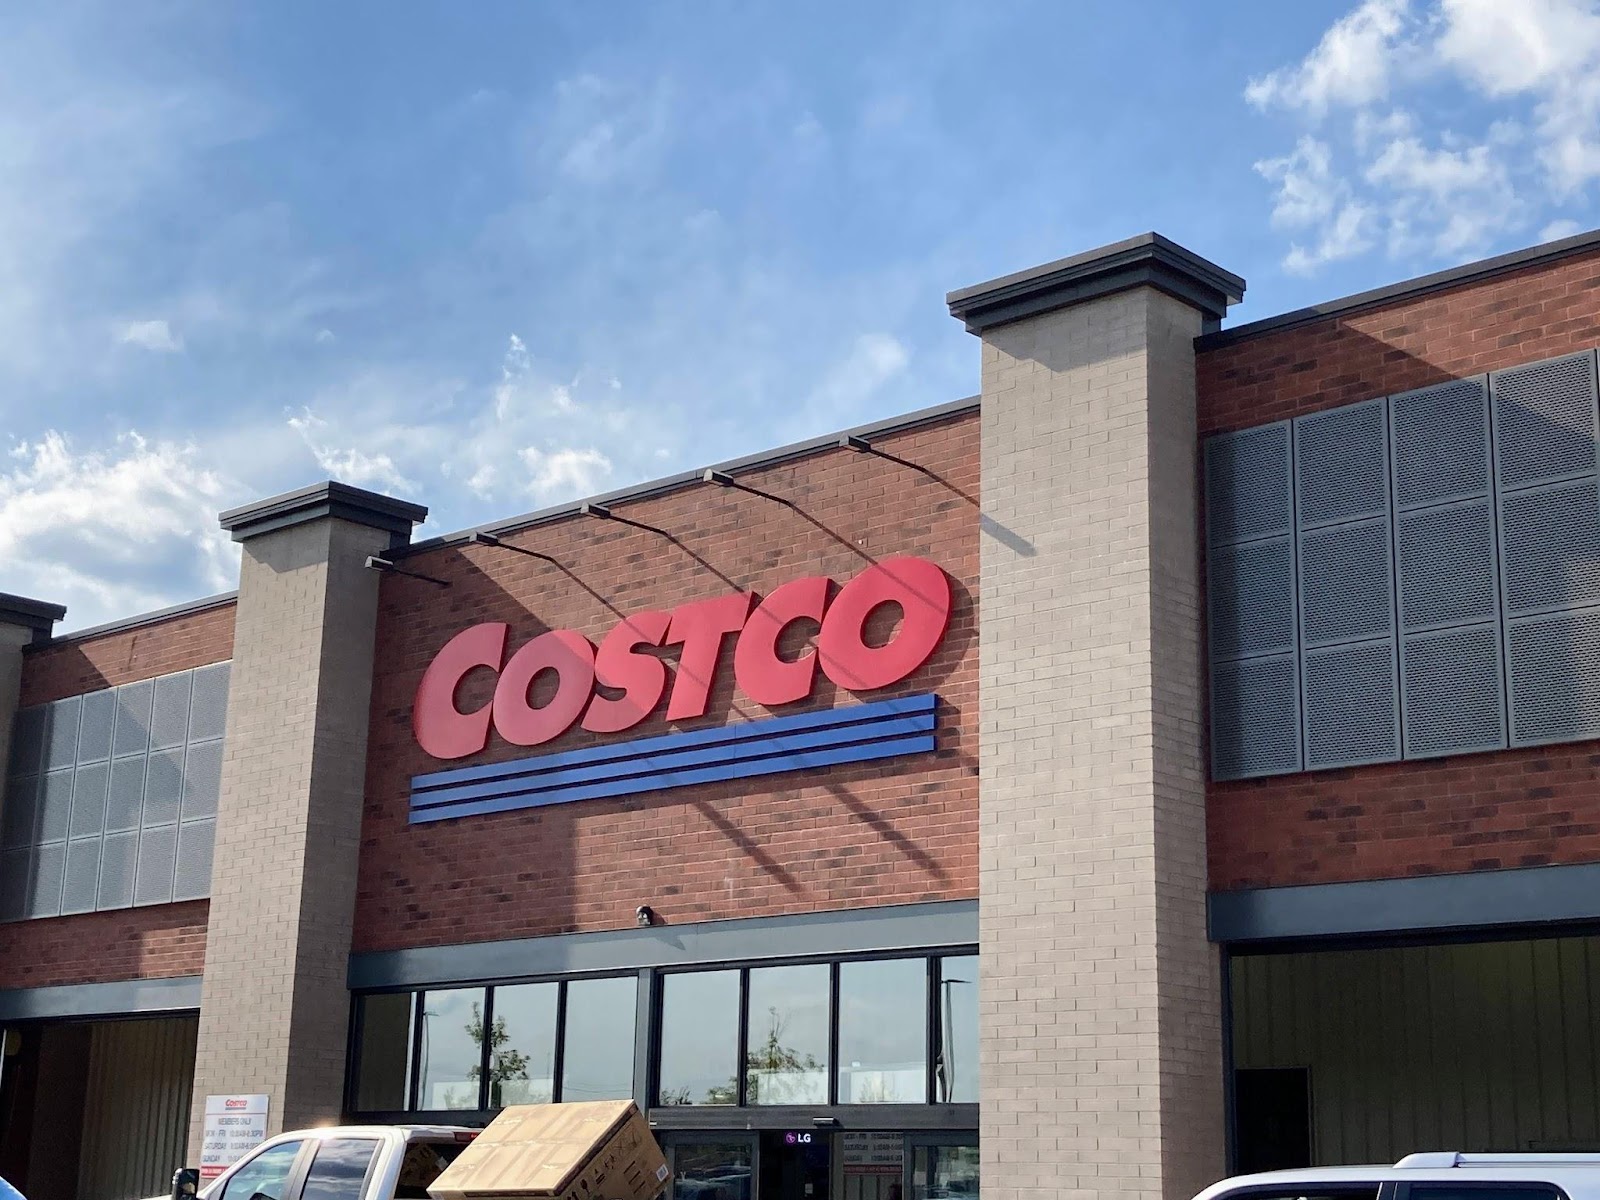 The largest Costco in North Carolina is in Fuquay-Varina.